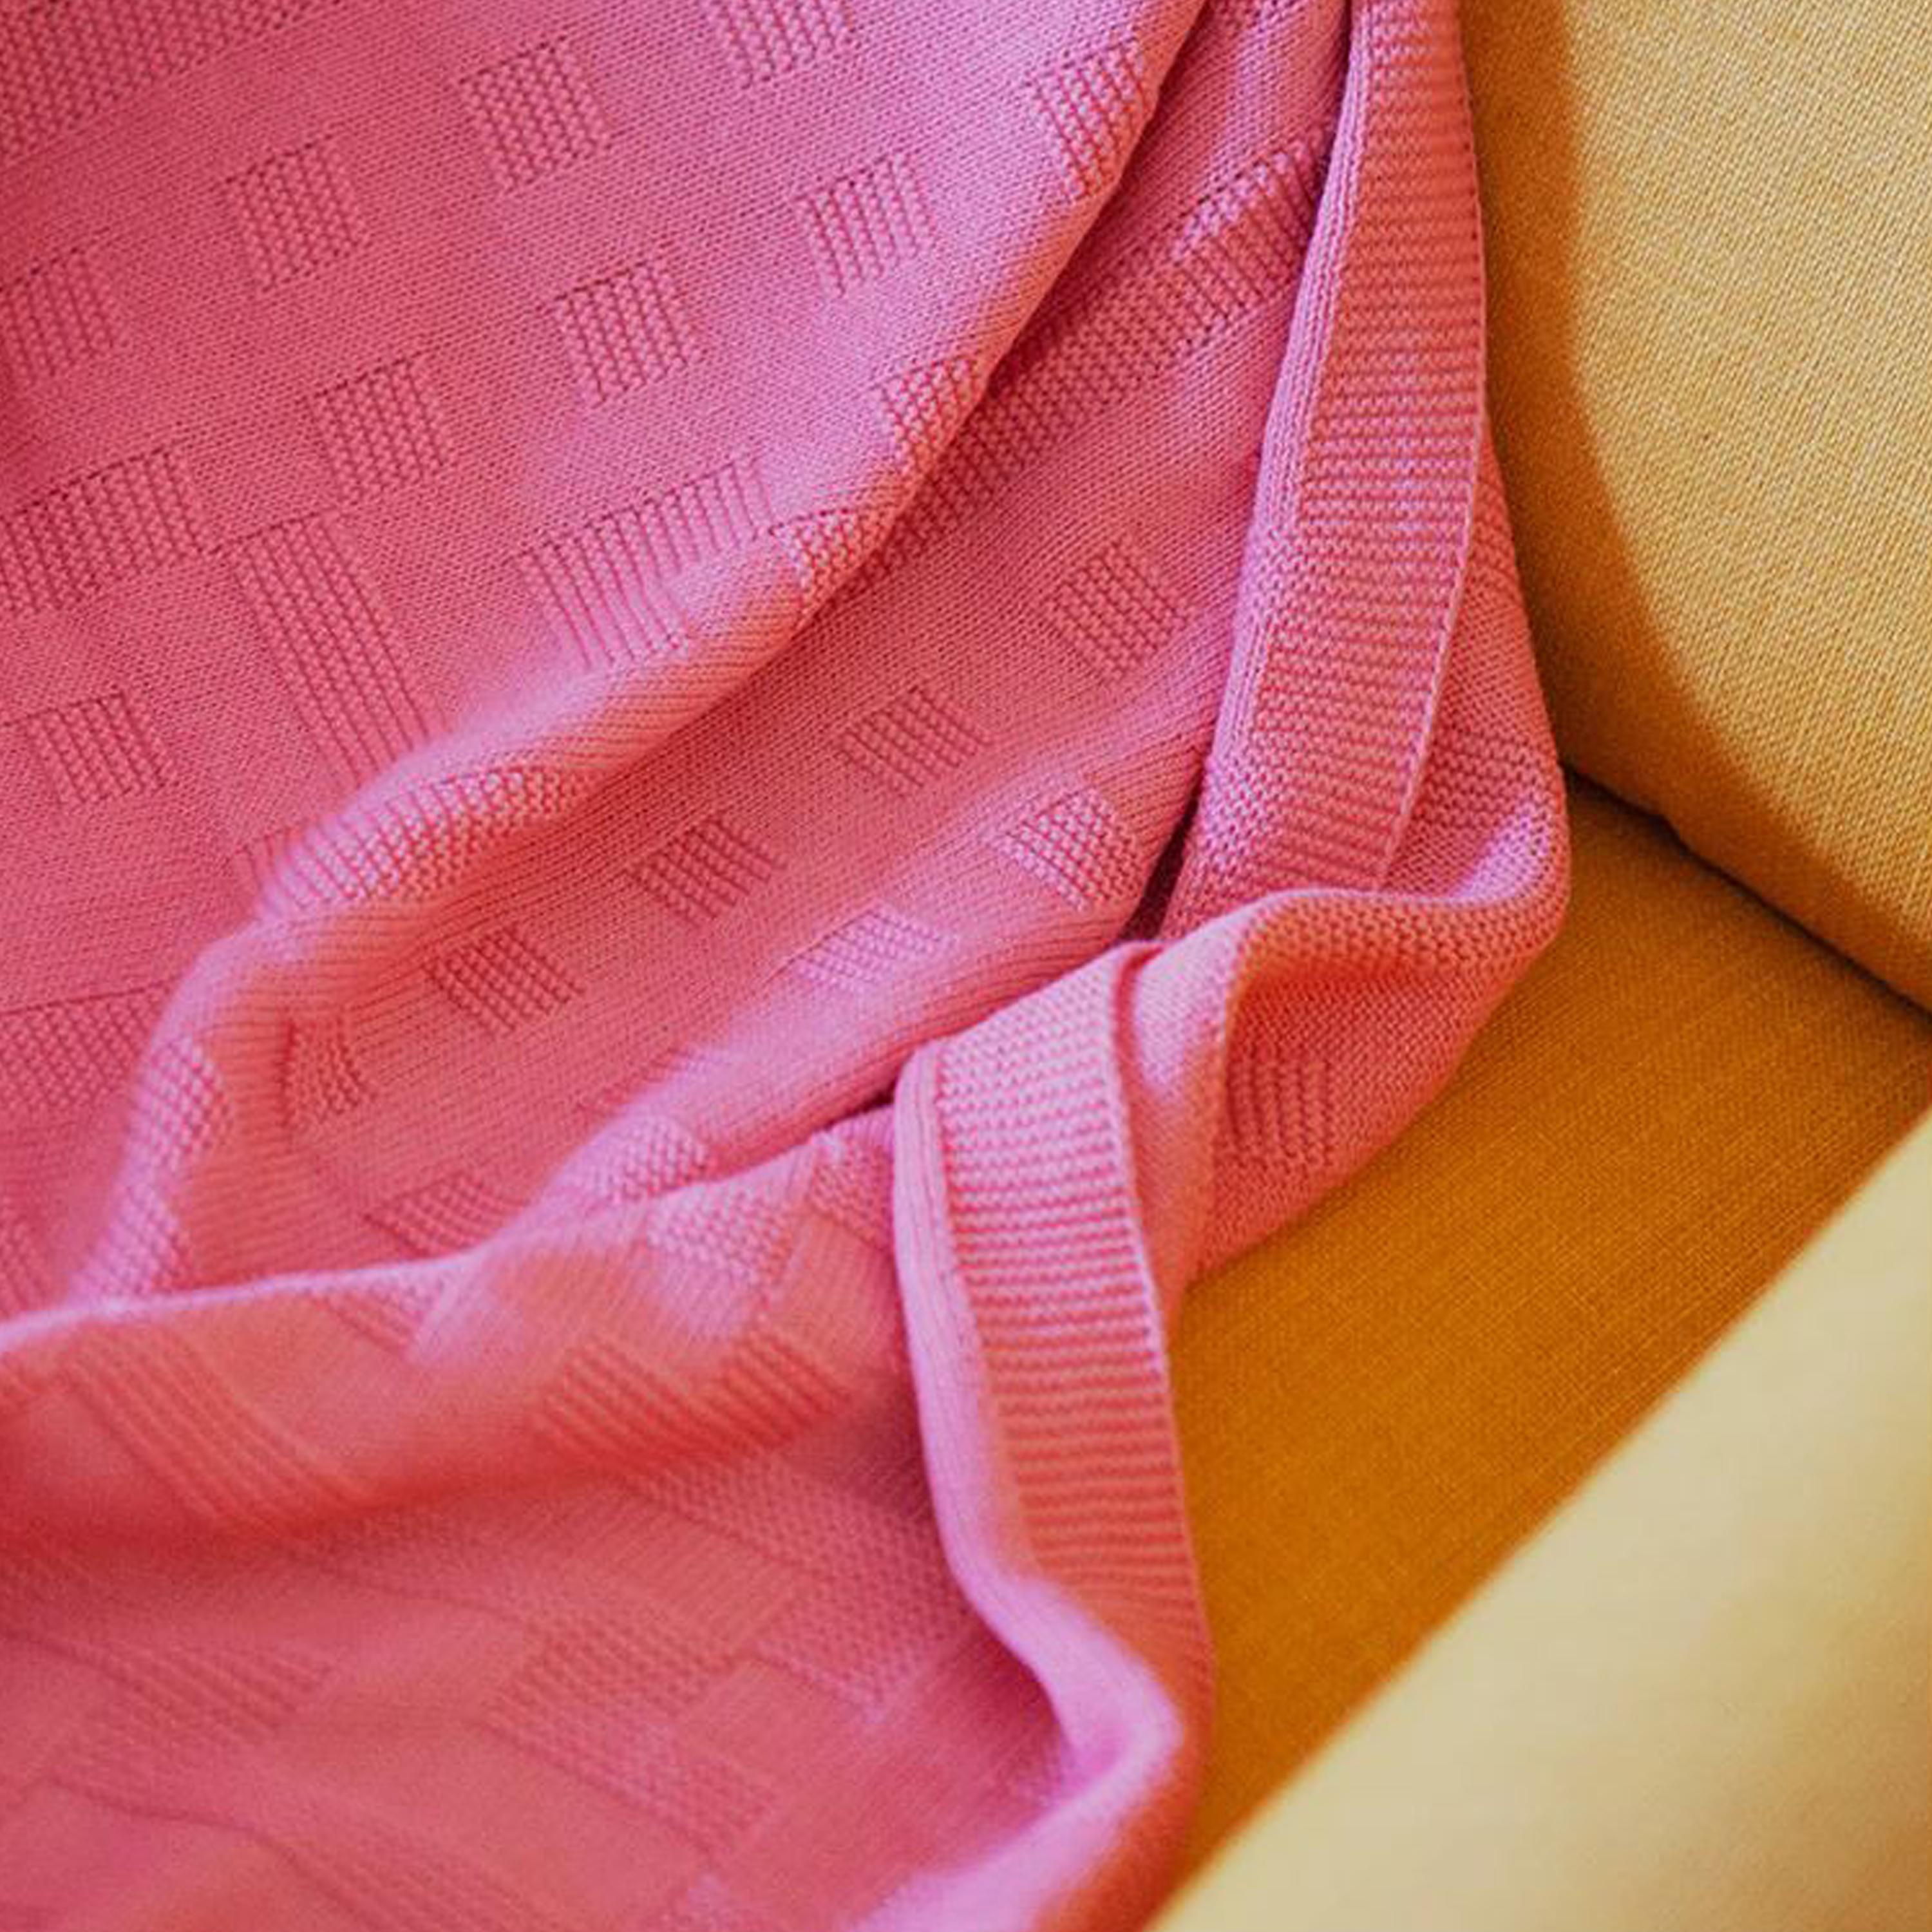 Hand-woven Pink throw designed by Cristian Zuzunaga, made of high-quality cotton with Marino wool. It features a left-stitching knitting technique with a 3-D effect. Its inspiration comes from a picture taken from one of Tokyo's most emblematic